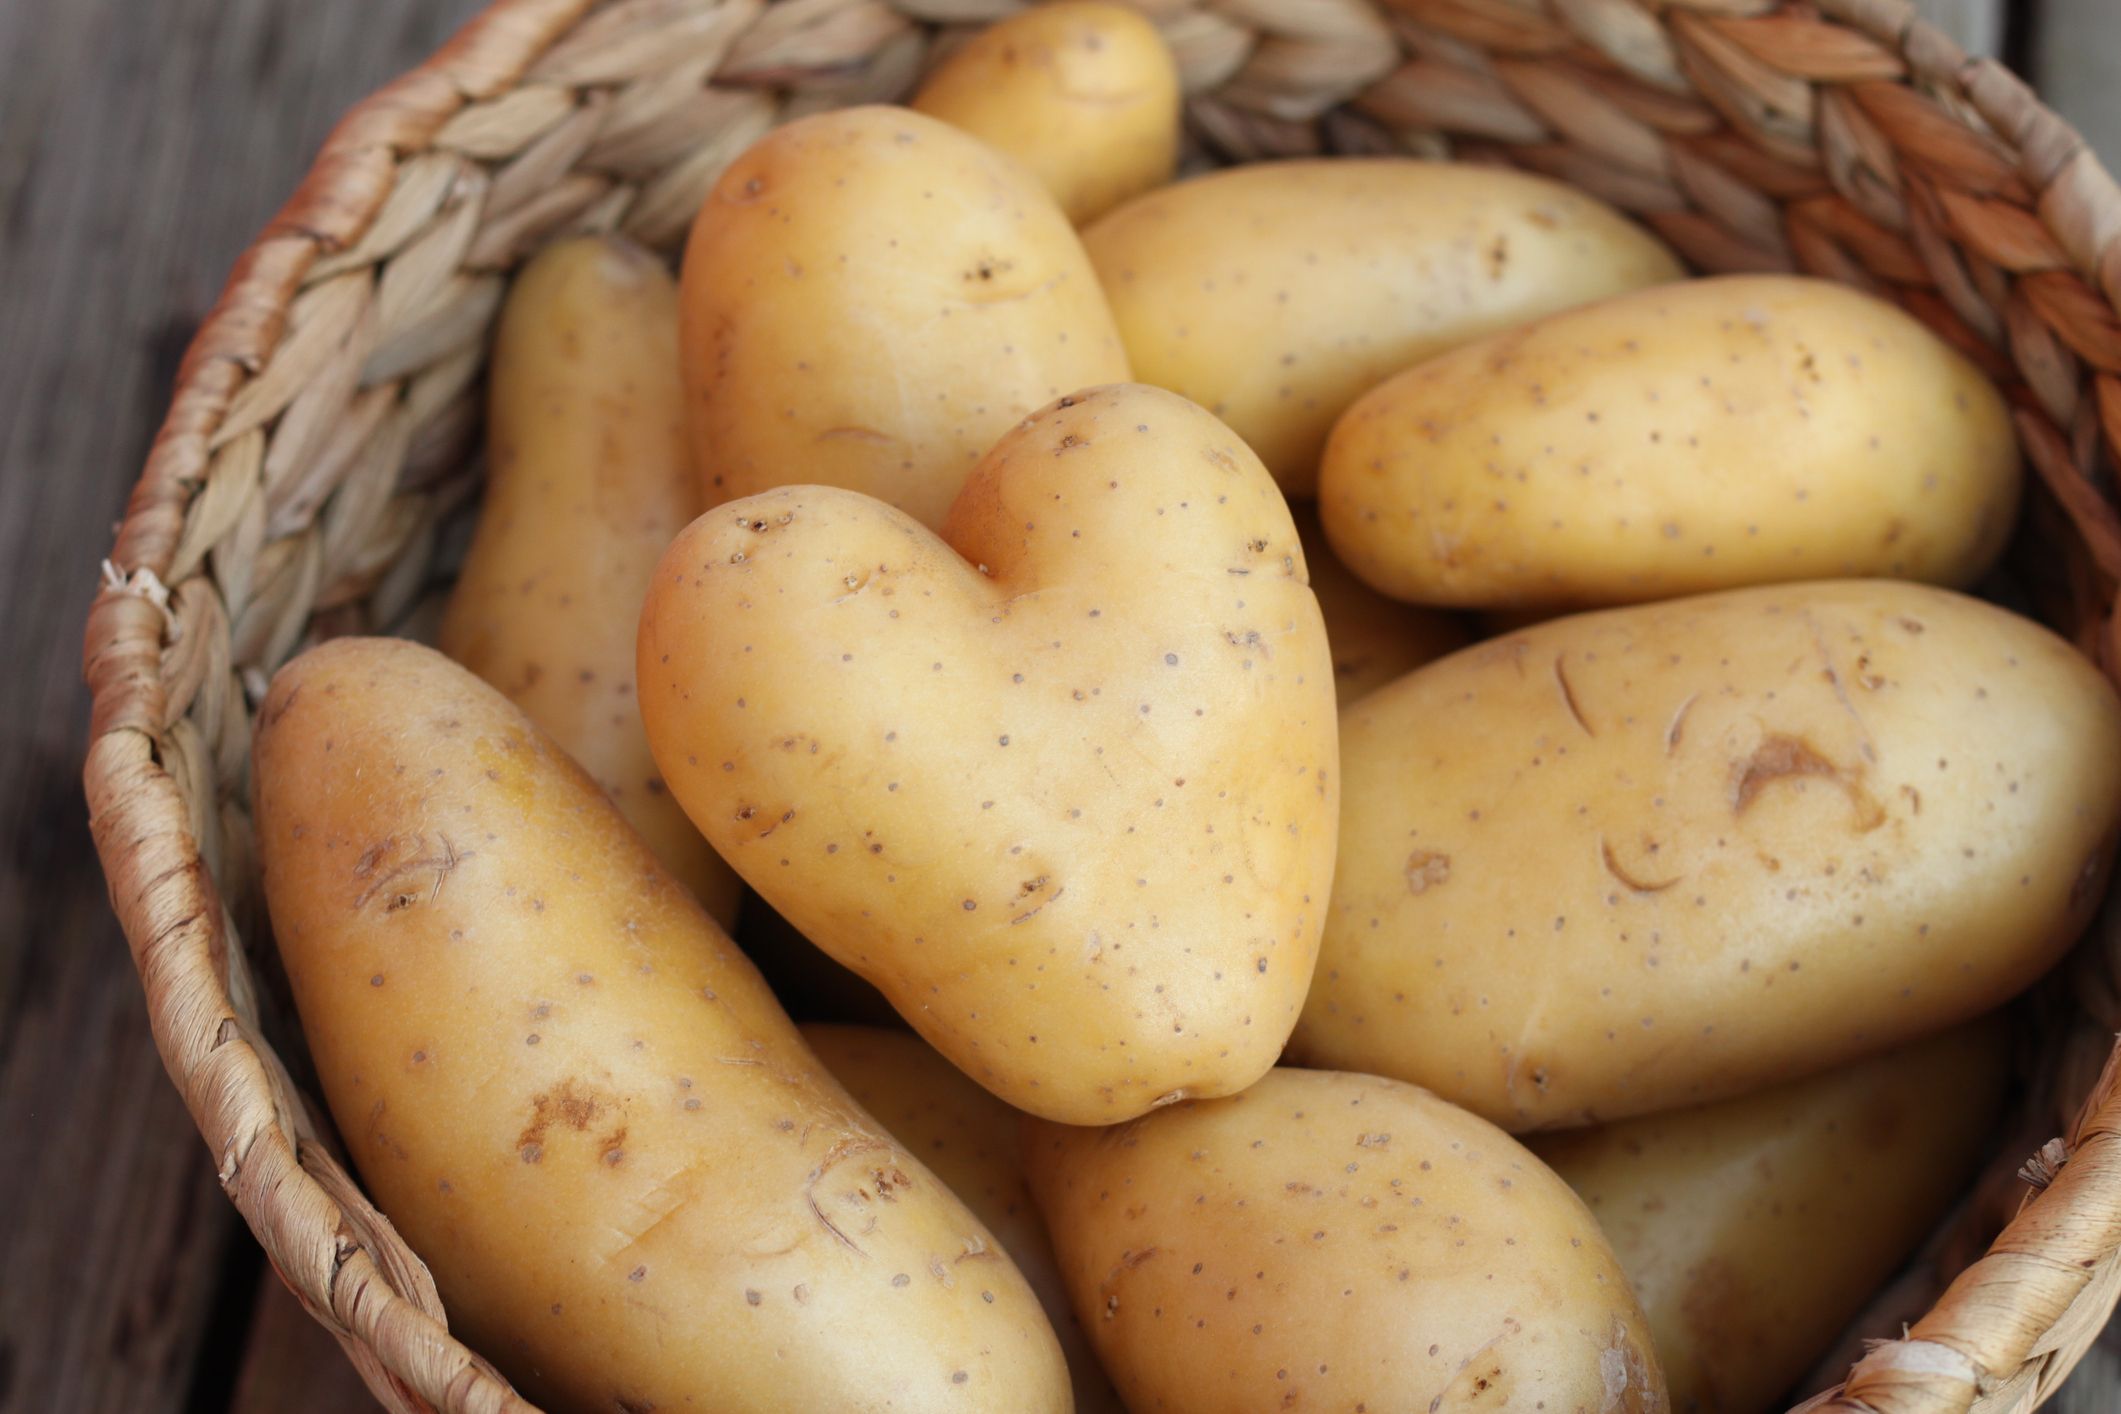 https://hips.hearstapps.com/hmg-prod/images/why-you-should-never-store-potatoes-in-the-fridge-640b0b8a0a49a.jpg